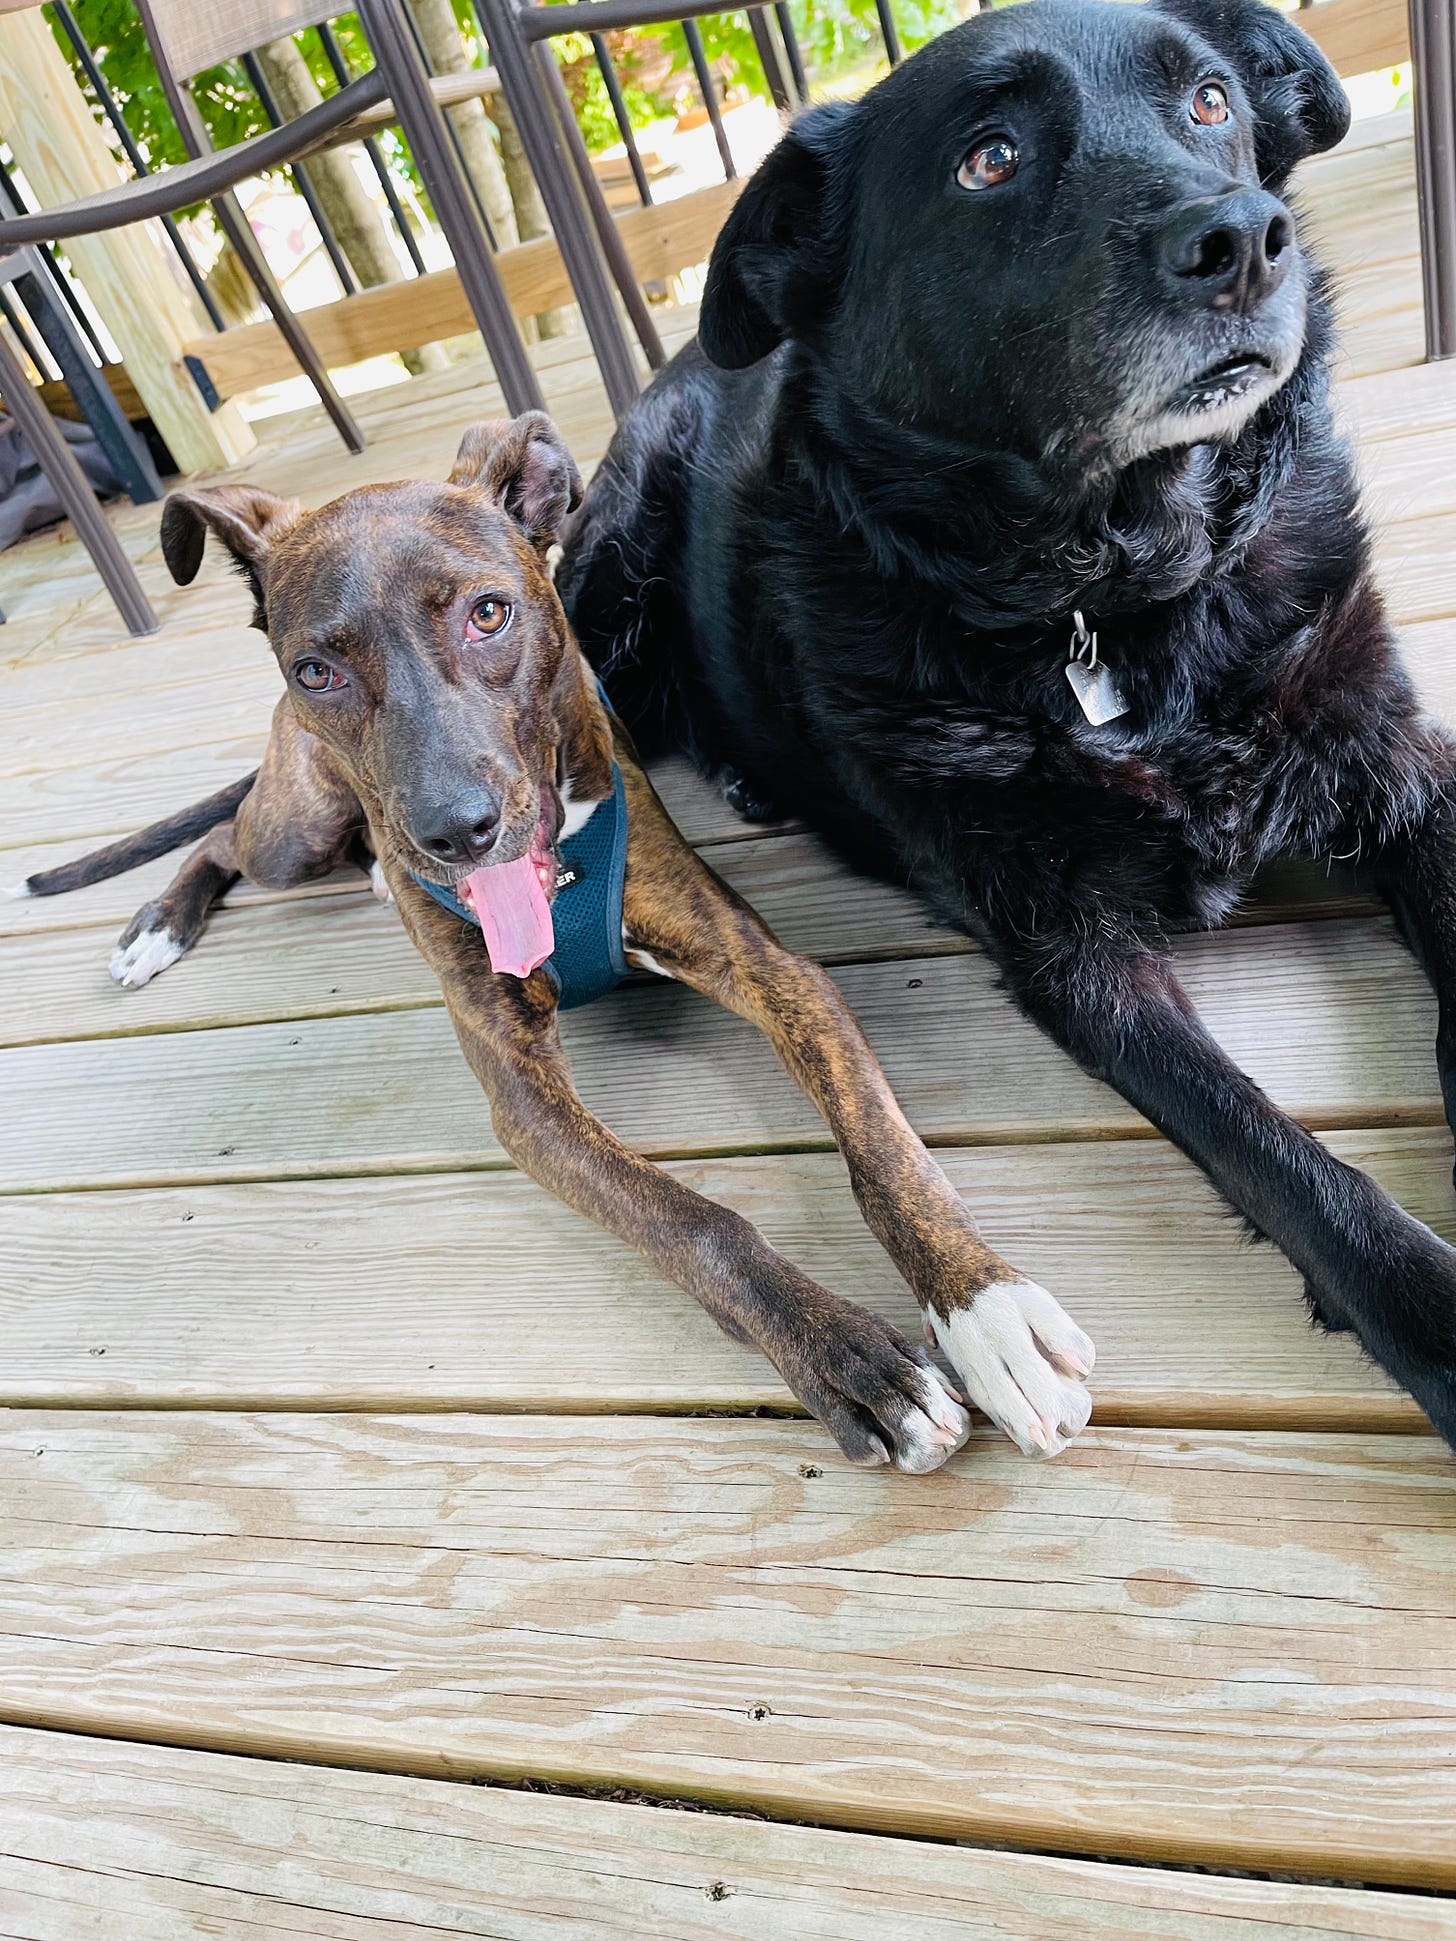 Two dogs close together in a tilted image on a porch